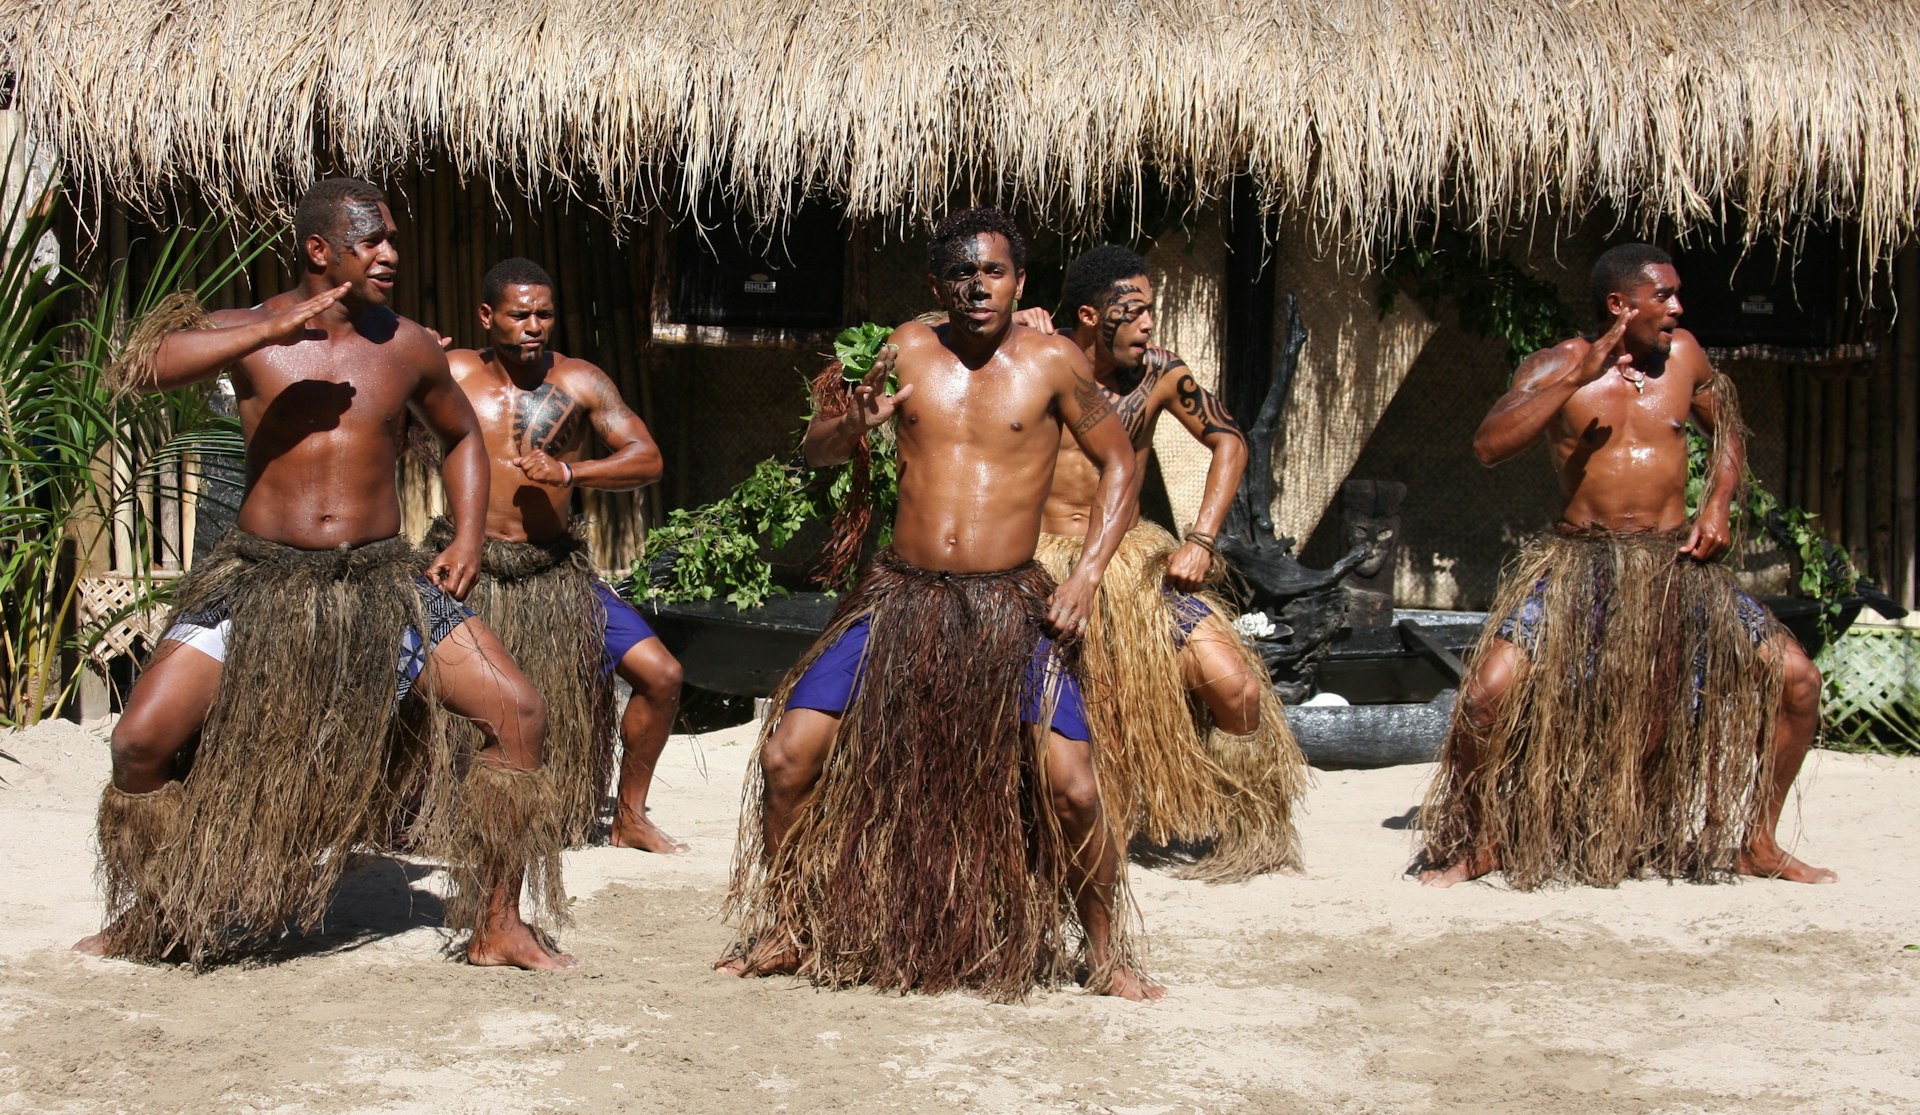 Robinson Crusoe island's group performs Island dance at Dancing Spectacular